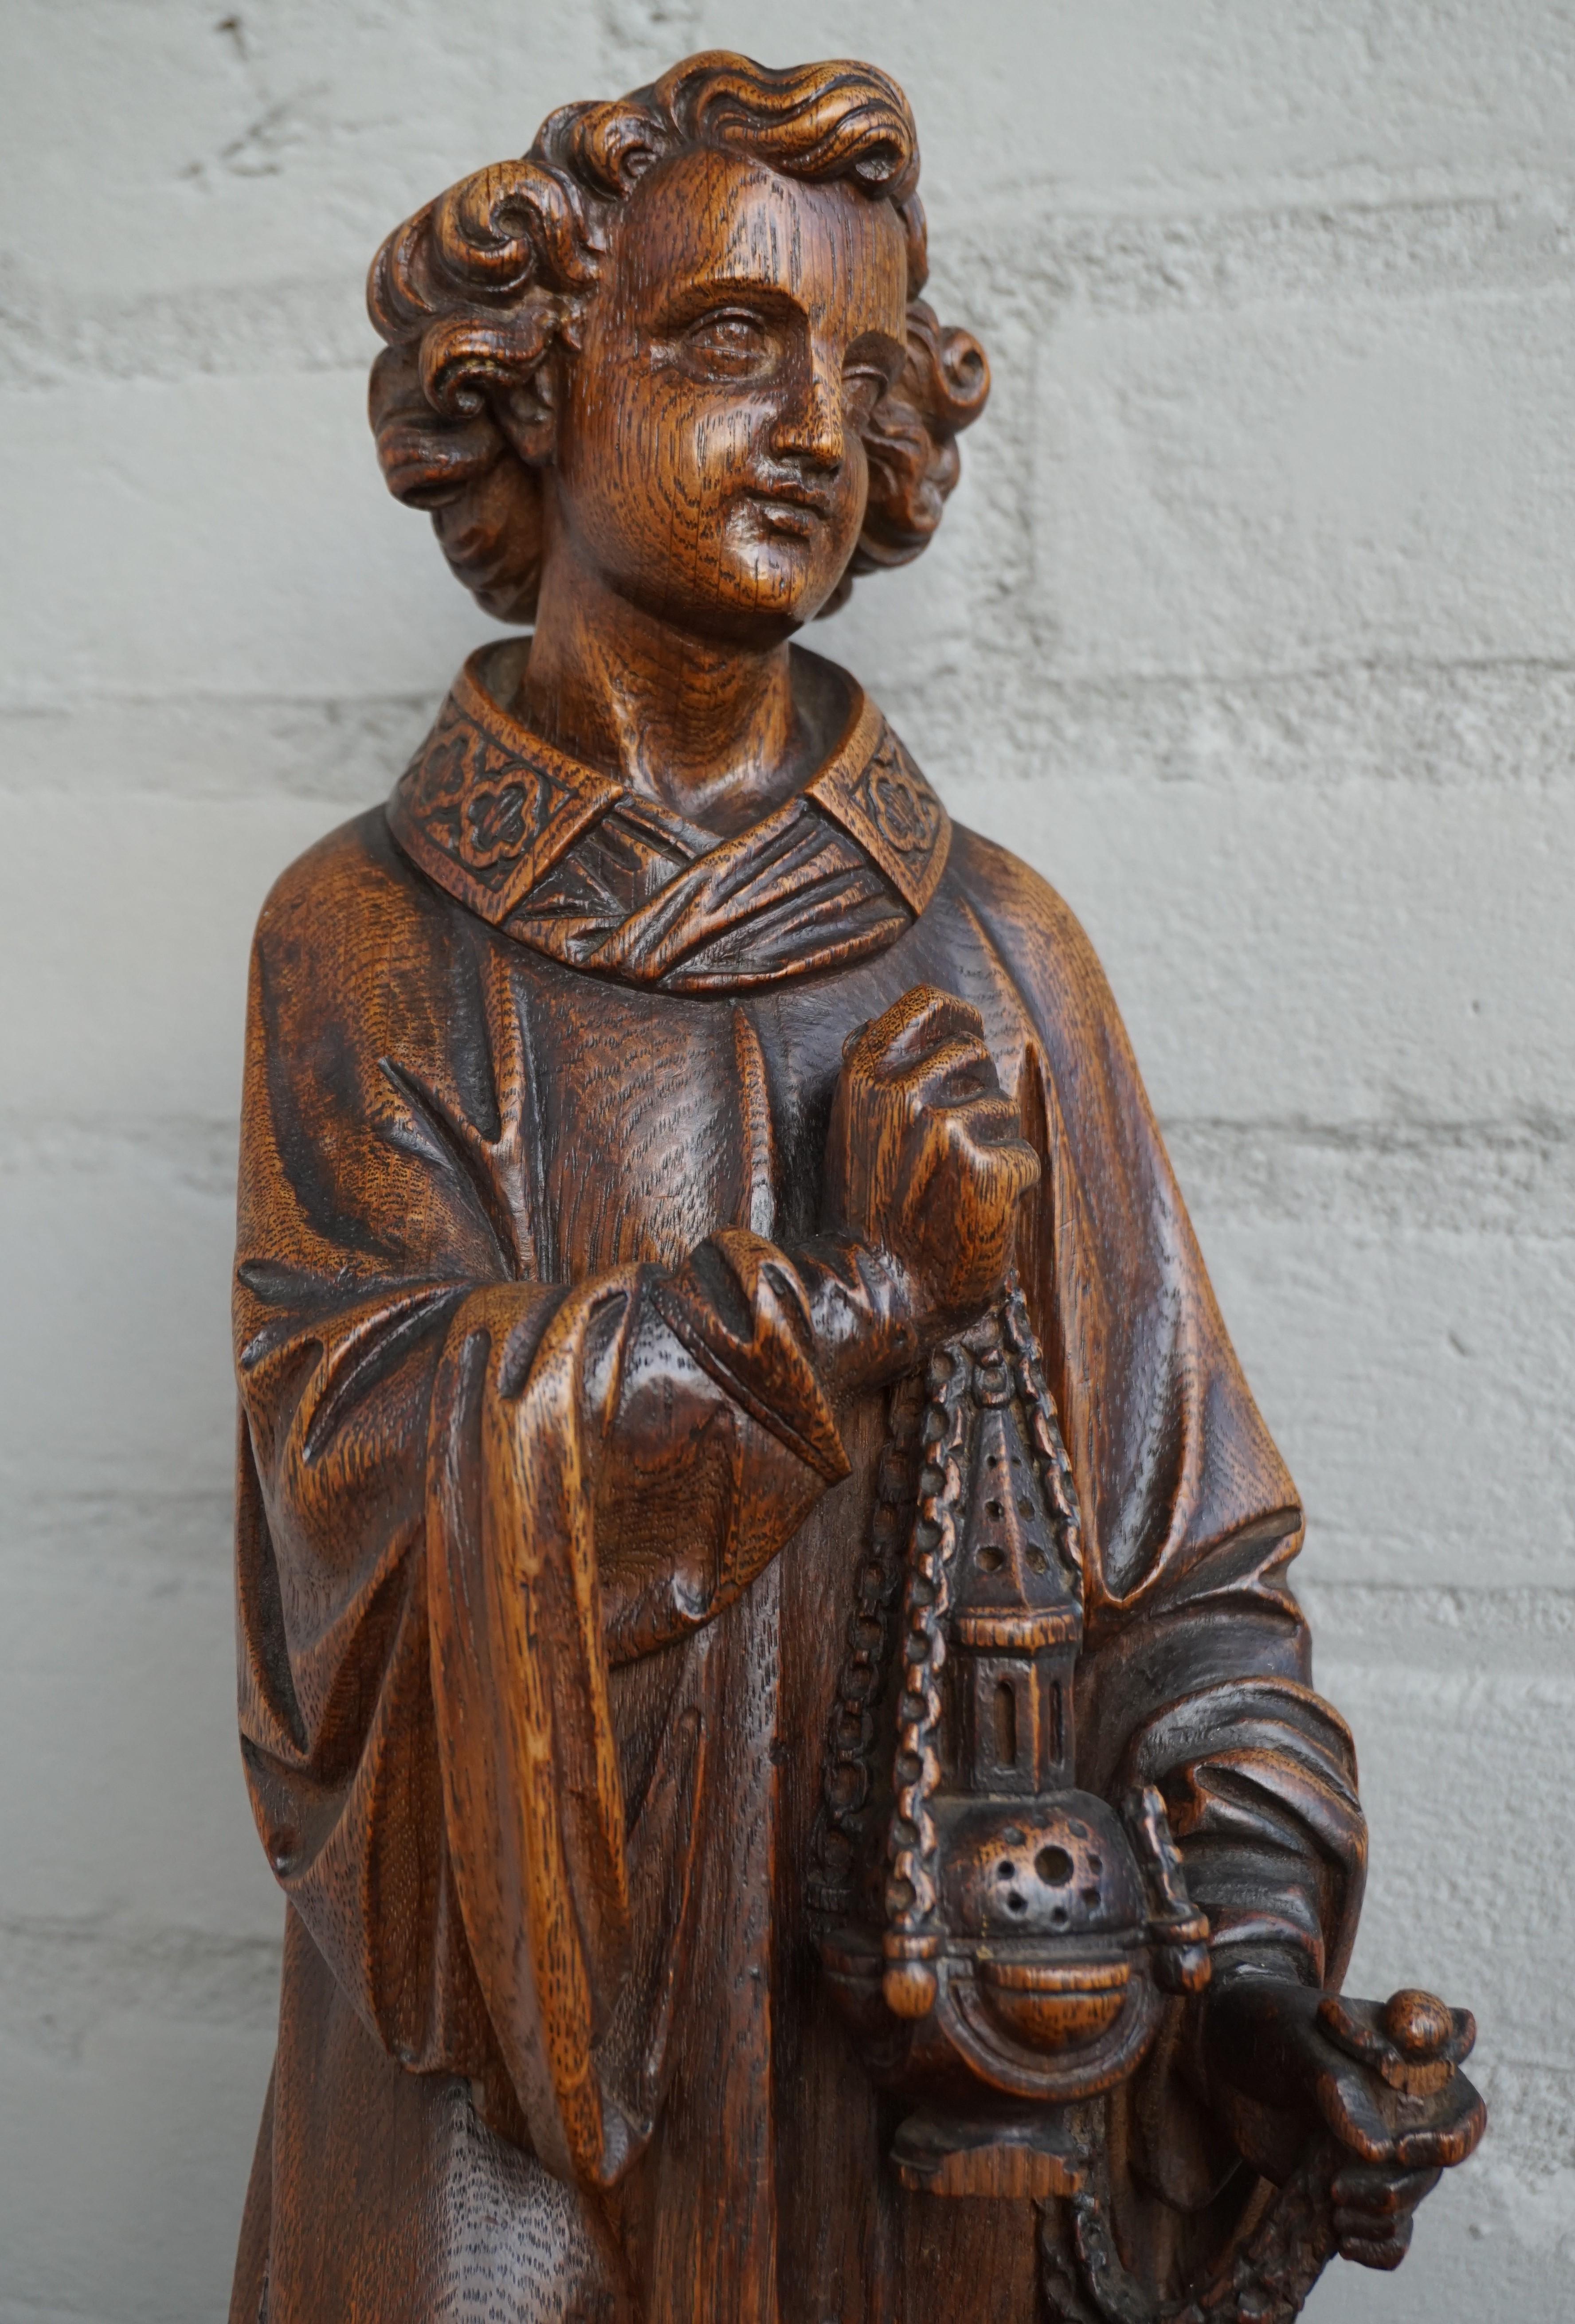 Stunning and unique, mid-19th century work of religious art.

Over the years we have sold many good quality sculptures of saints, but we have never seen or sold a top quality carved, wooden sculpture of an altar boy. The fact that this 19th